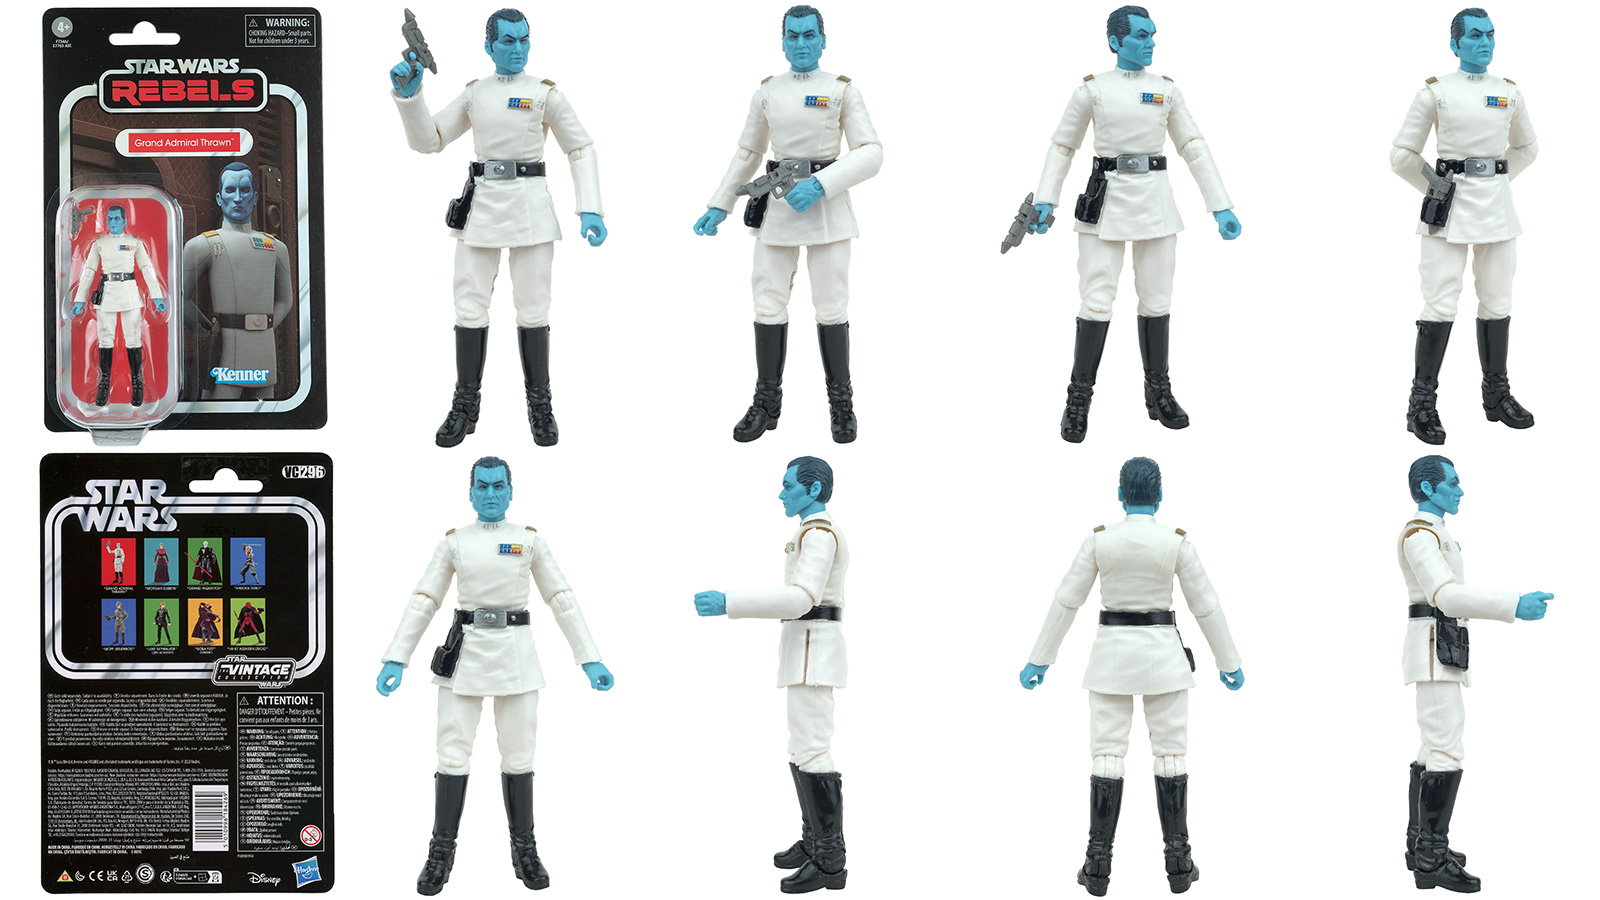 New Photos - The Vintage Collection VC296 Grand Admiral Thrawn